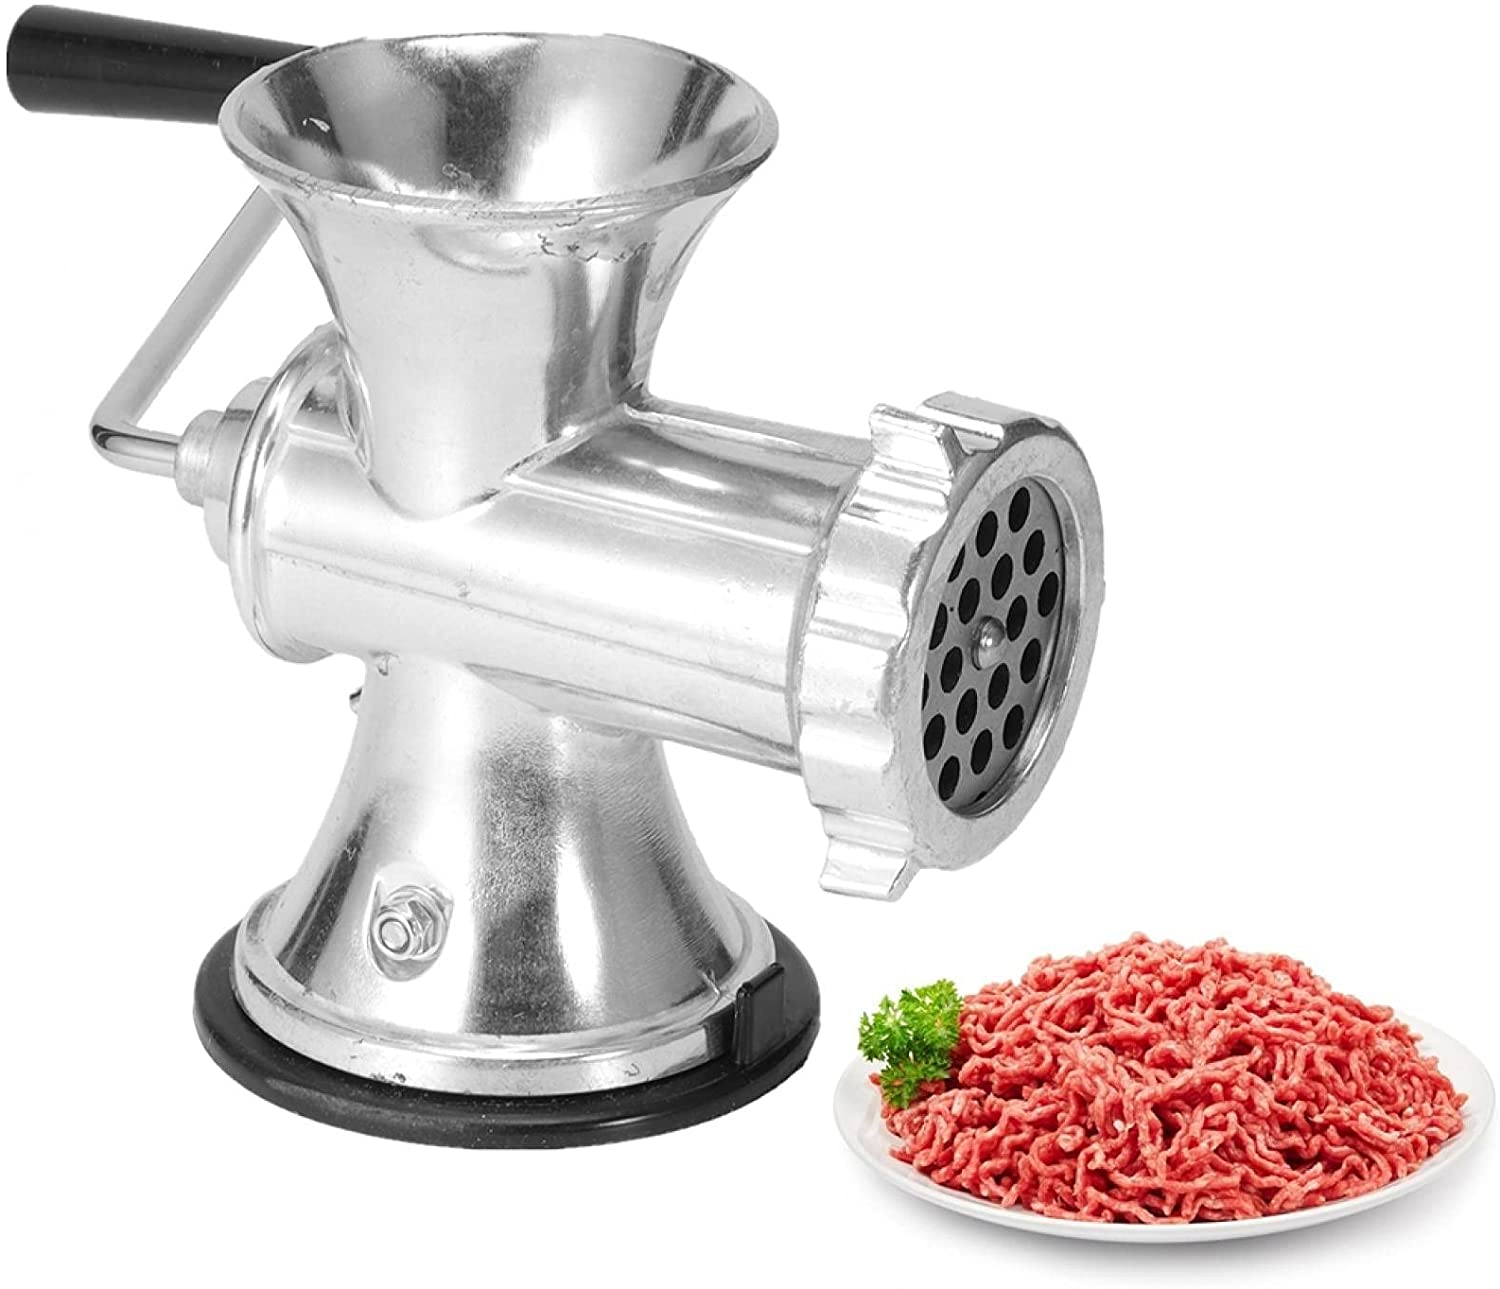 Jarchii Meat Mincer, Aluminium Alloy Heavy Duty Powerful Manual Food Meat Grinder Vegetable Seasoning Pepper Grinder Sausage Stuffer Attachment for Kitchen Home